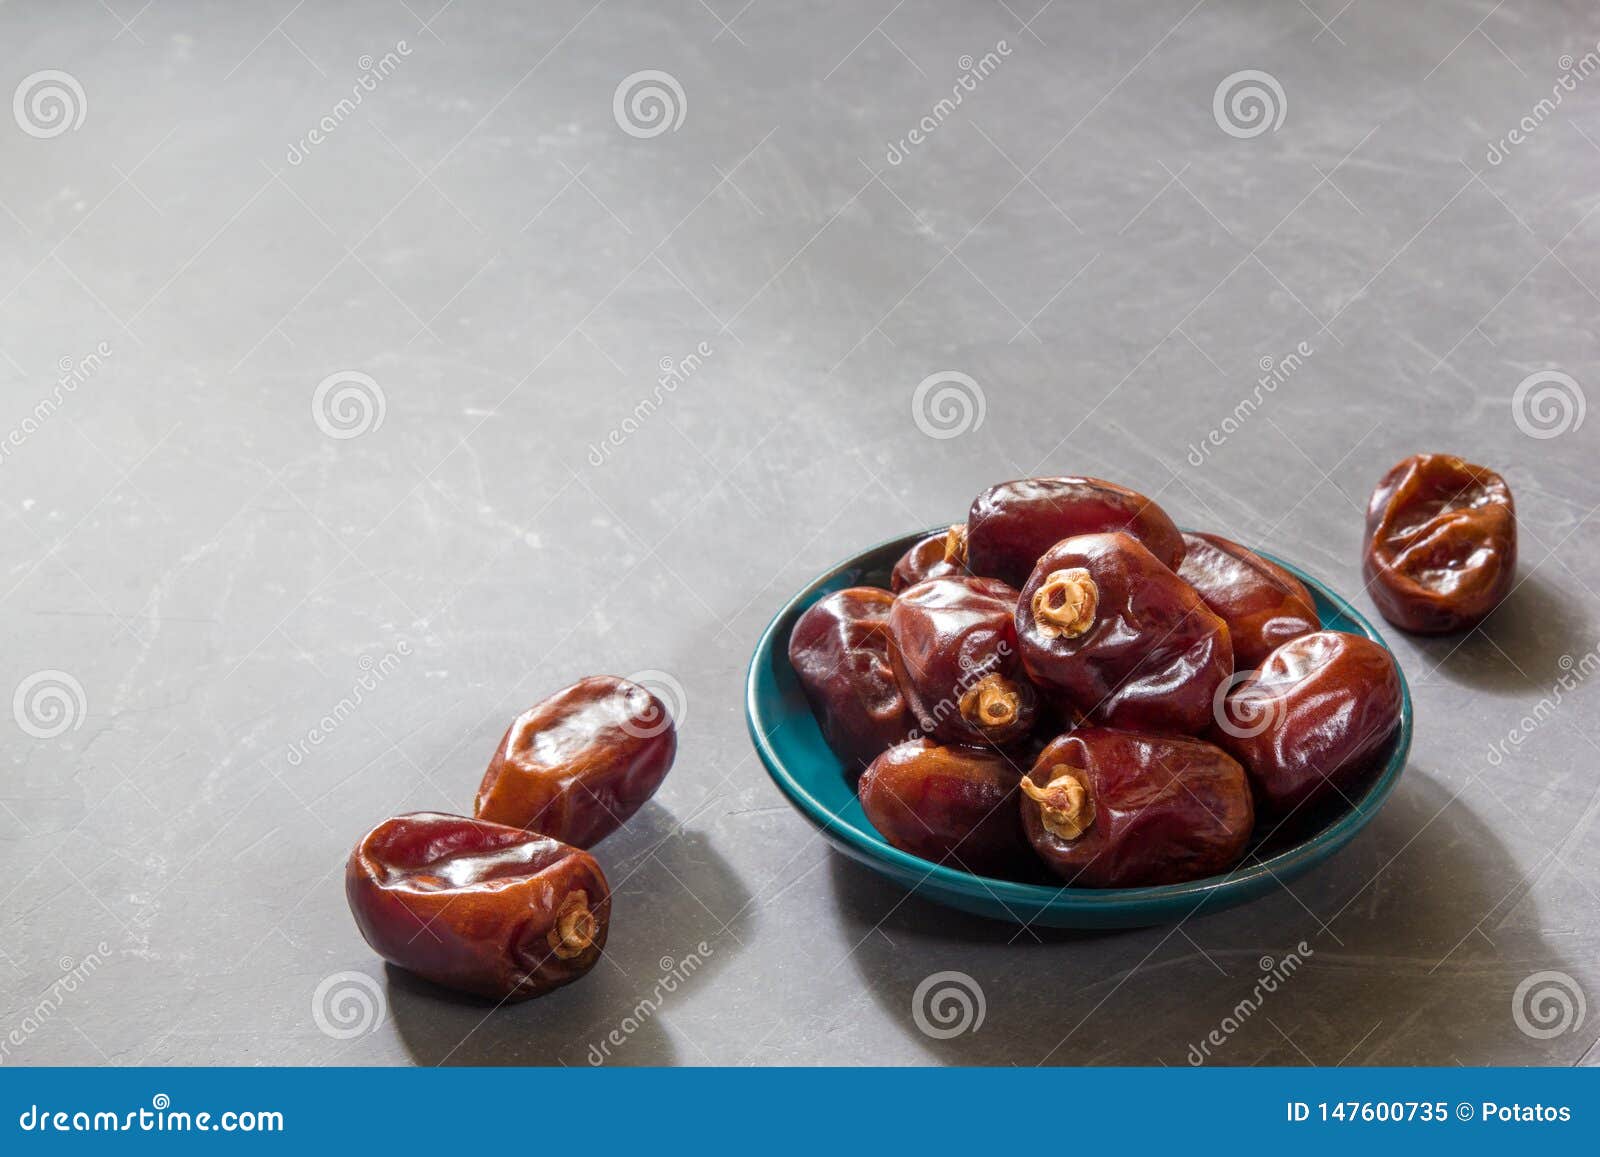 delicious pitted dates on gray table.